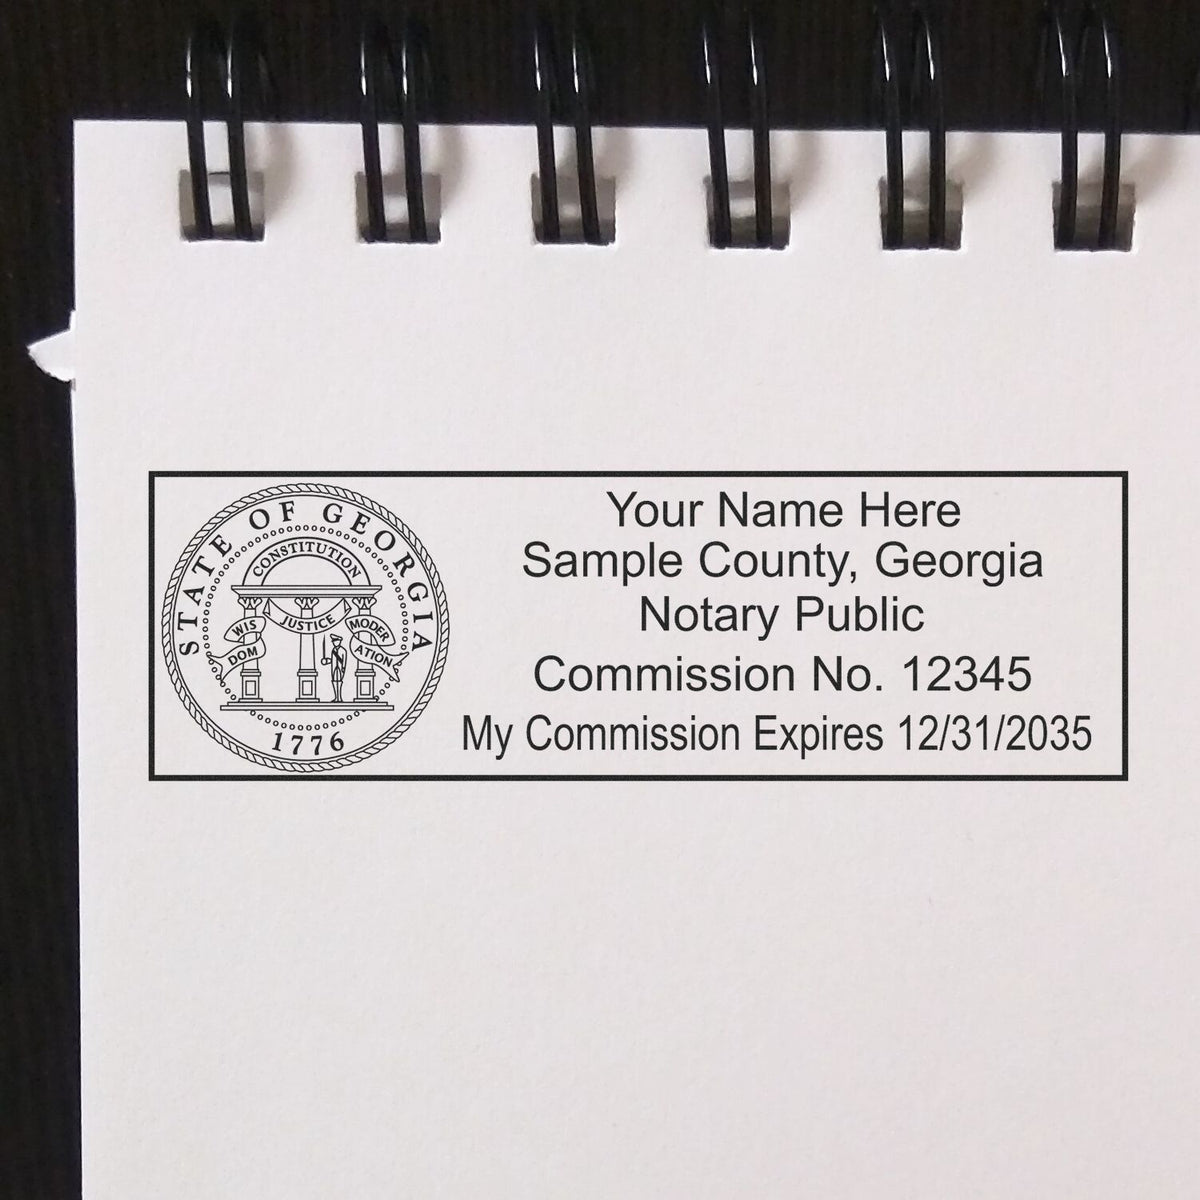 This paper is stamped with a sample imprint of the Super Slim Georgia Notary Public Stamp, signifying its quality and reliability.